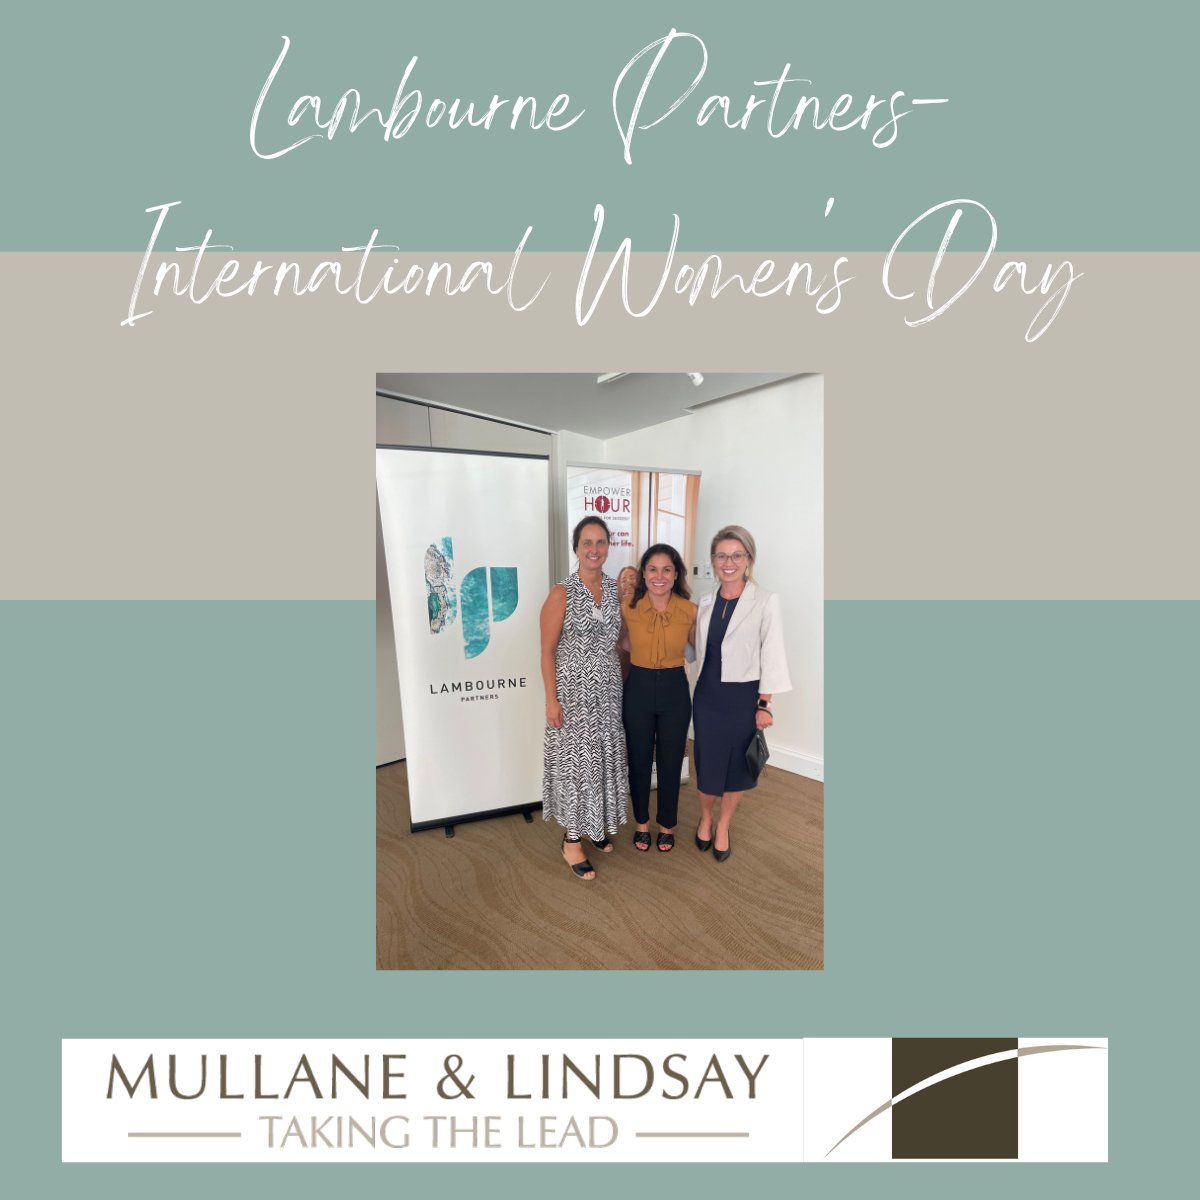 Mullane & Lindsay recently attended a Lambourne Partners event at Noah's on the Beach in honor of International Womens Day. 

#InternationalWomensDay #LambournePartners #Takingthelead